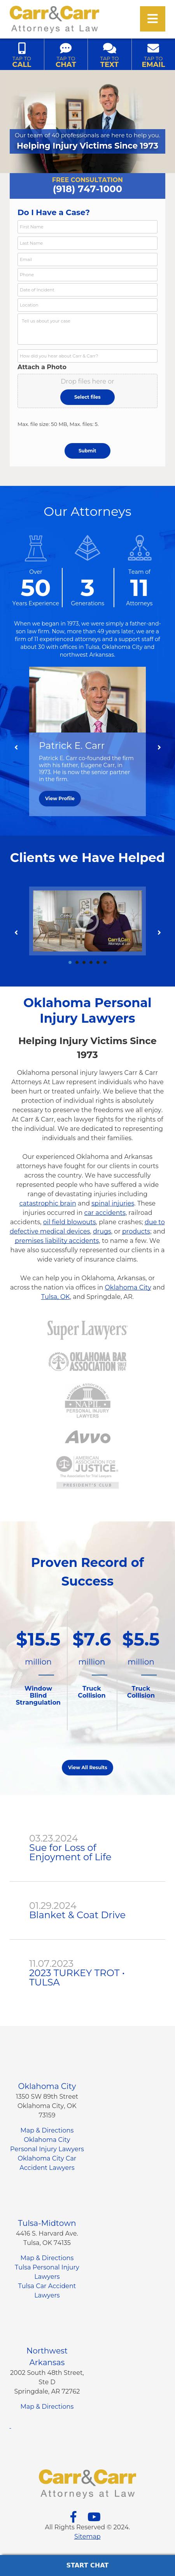 Carr & Carr, Attorneys at Law - Oklahoma City OK Lawyers